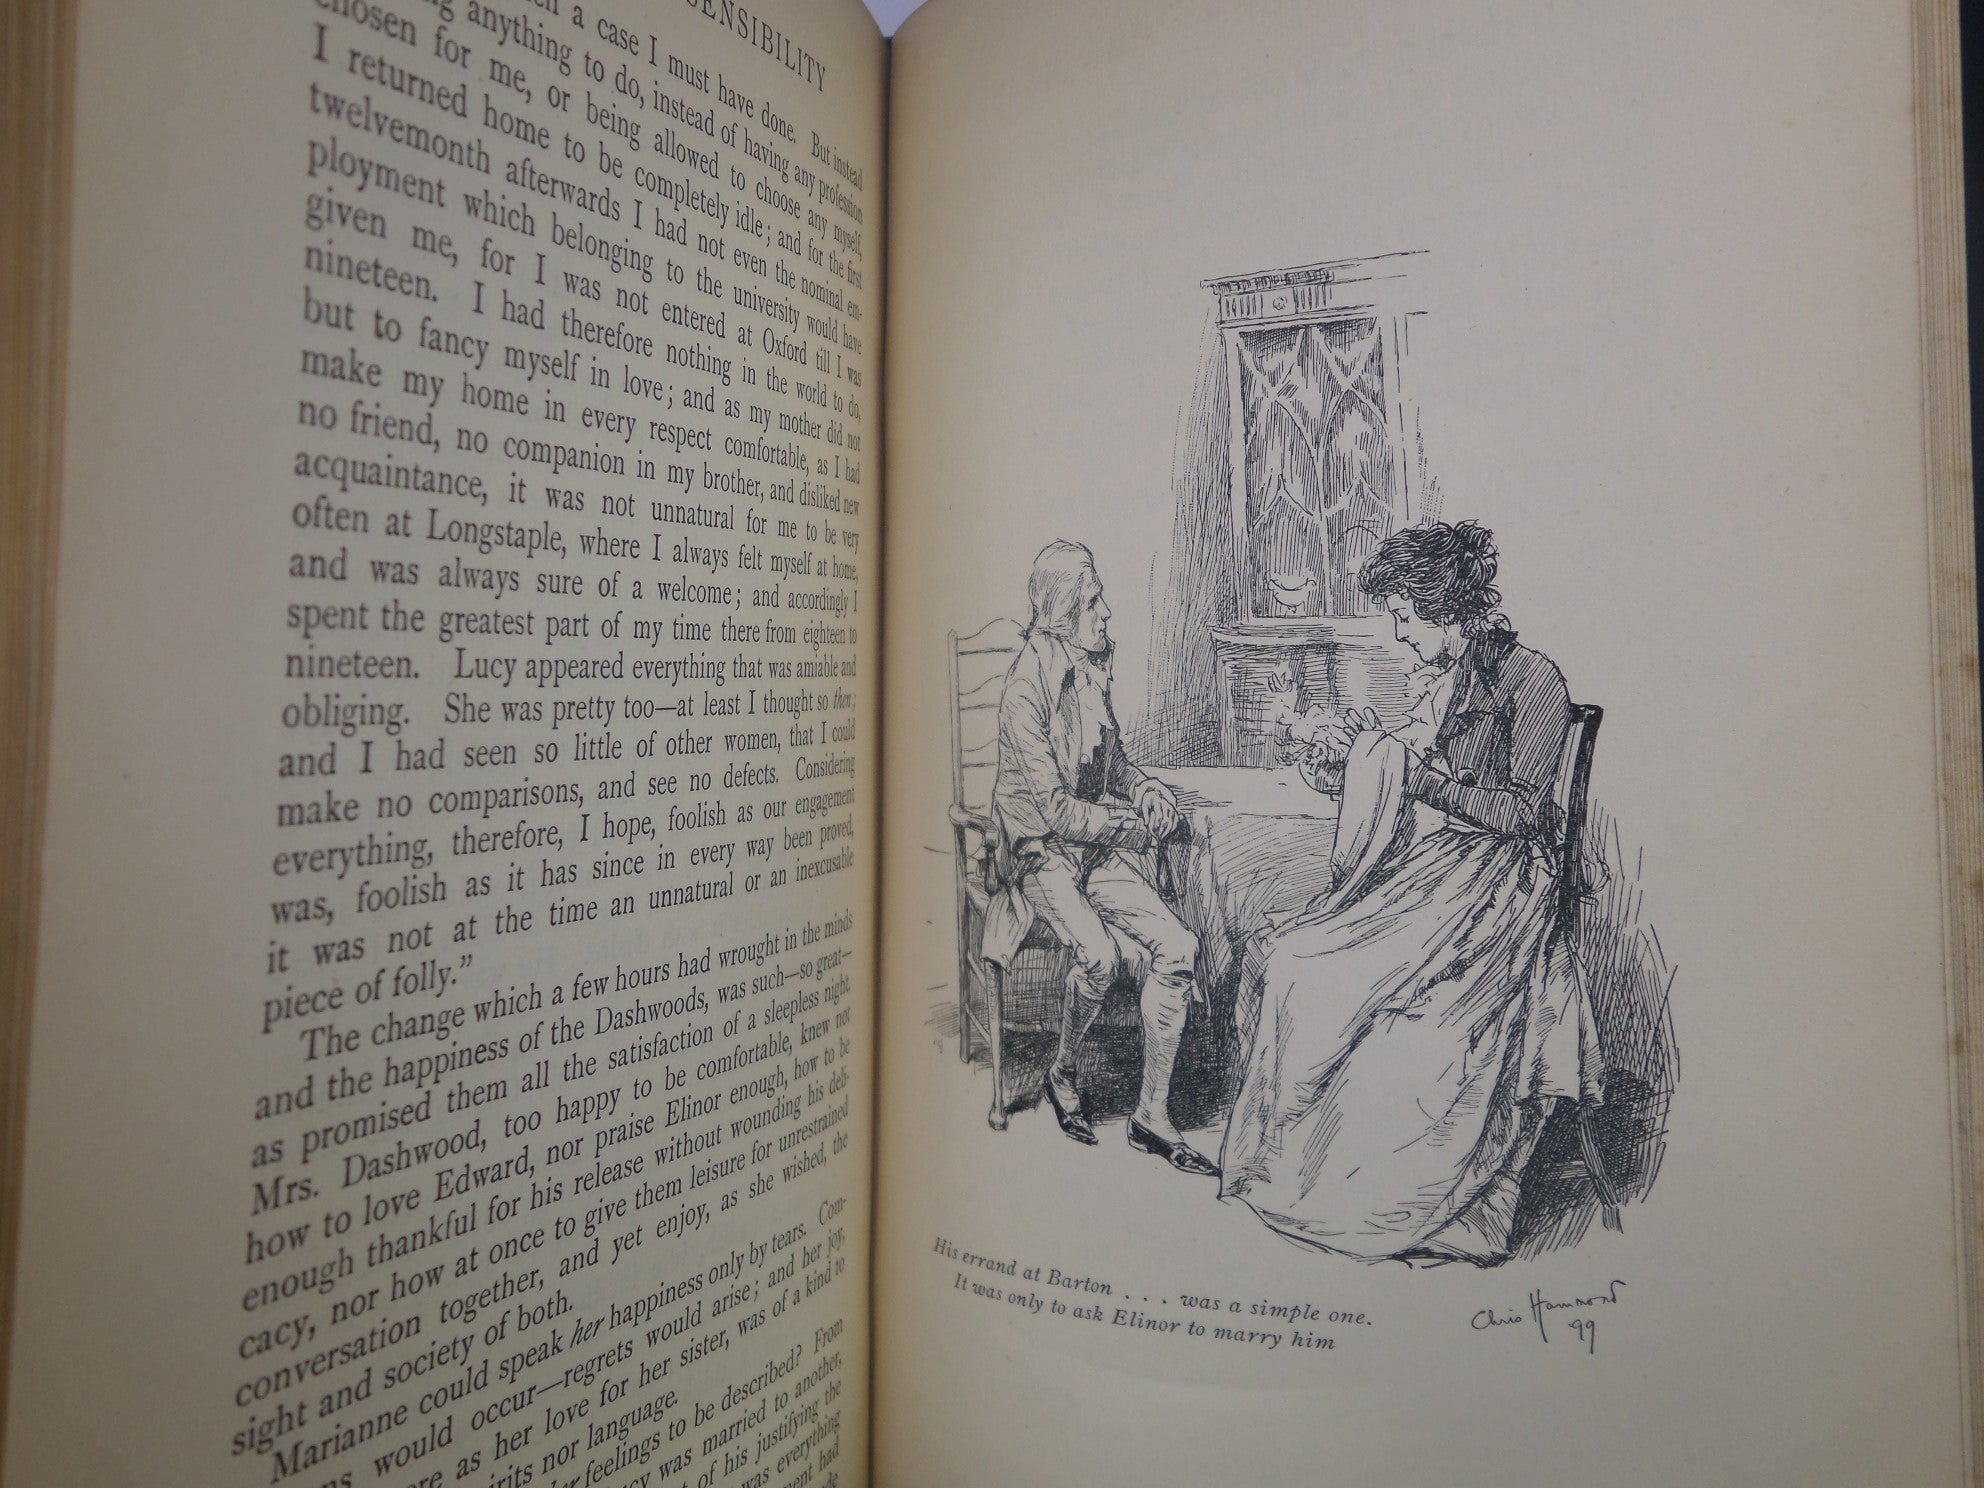 SENSE AND SENSIBILITY BY JANE AUSTEN 1899 ILLUSTRATED BY CHRIS HAMMOND